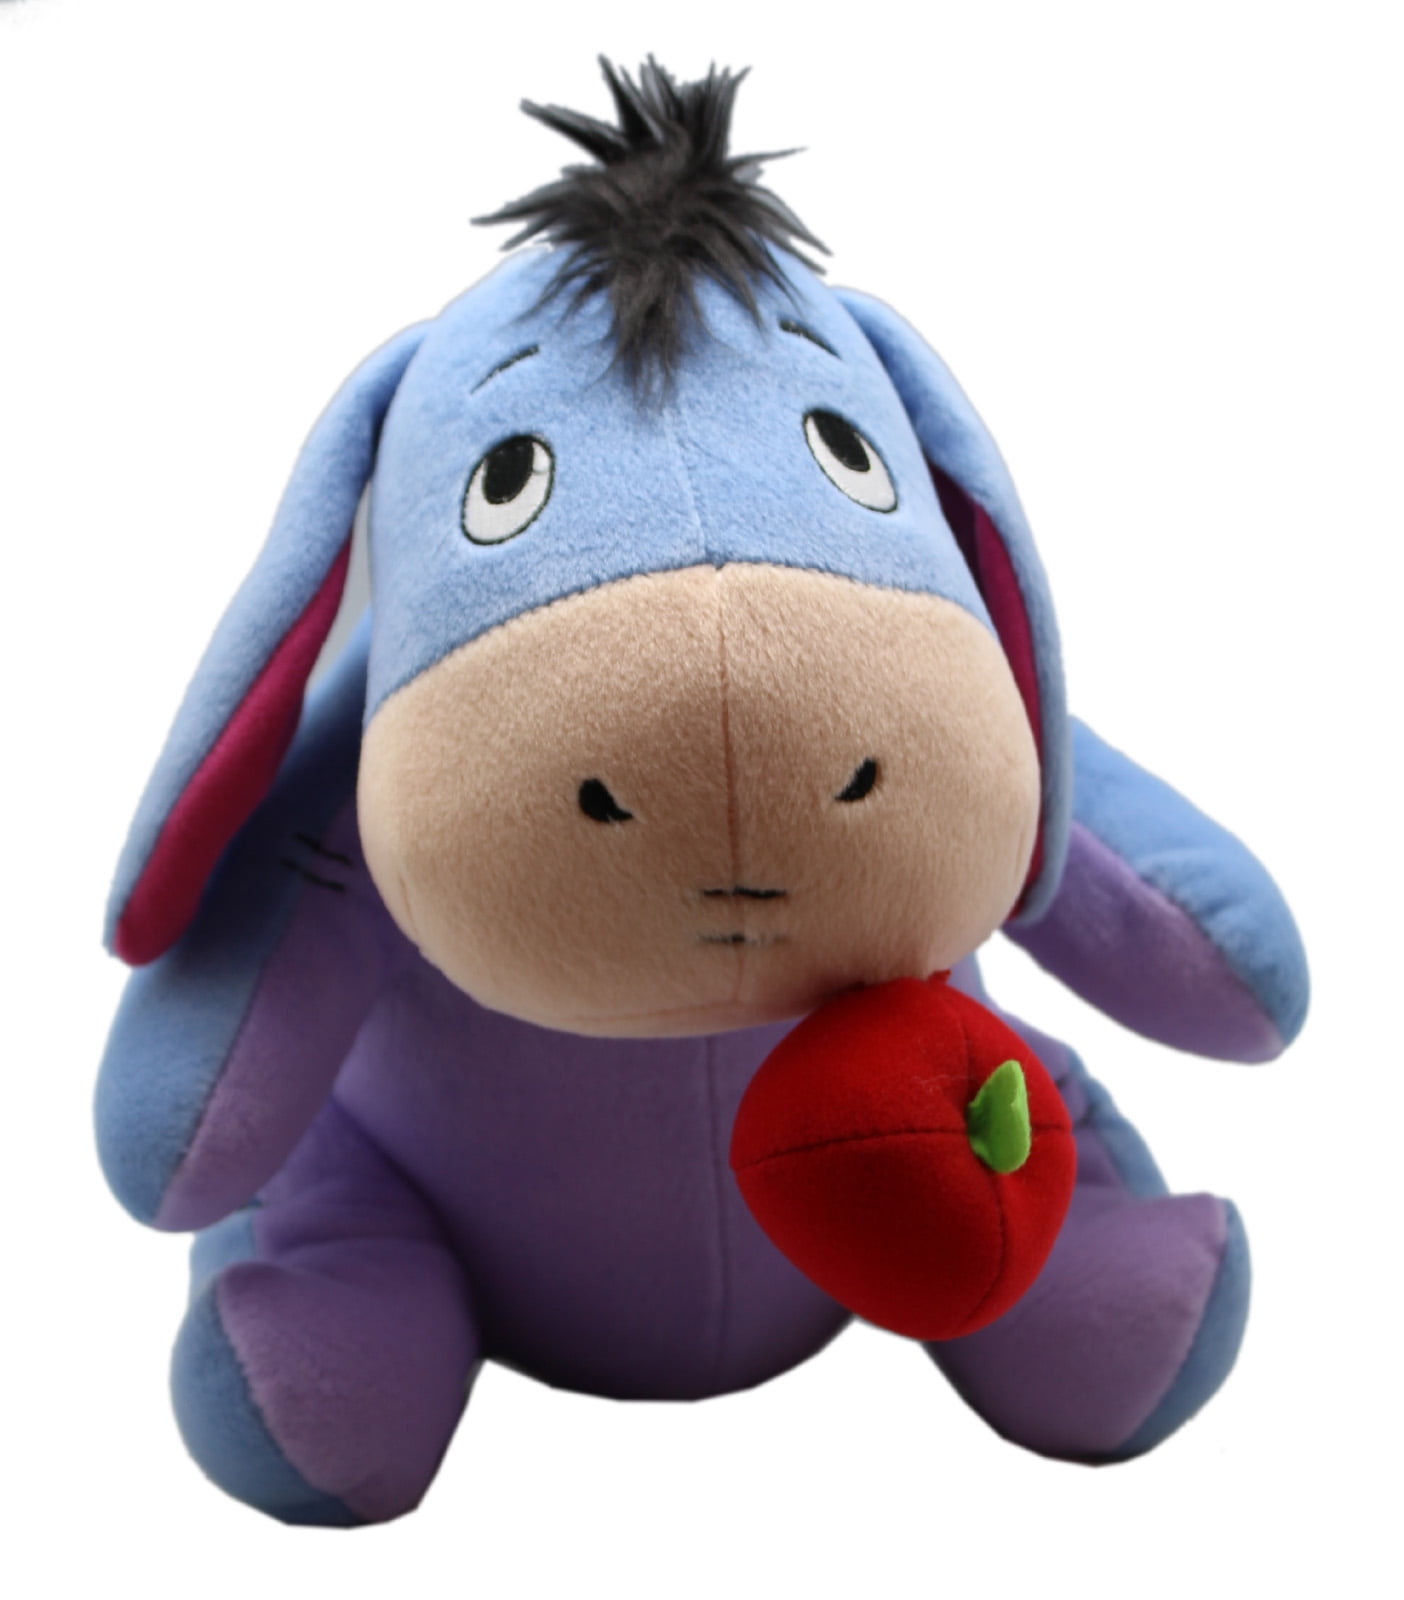 New Winnie the Pooh Official Eeyore Plush Pillow Plush Toy Pet Doll 20” 